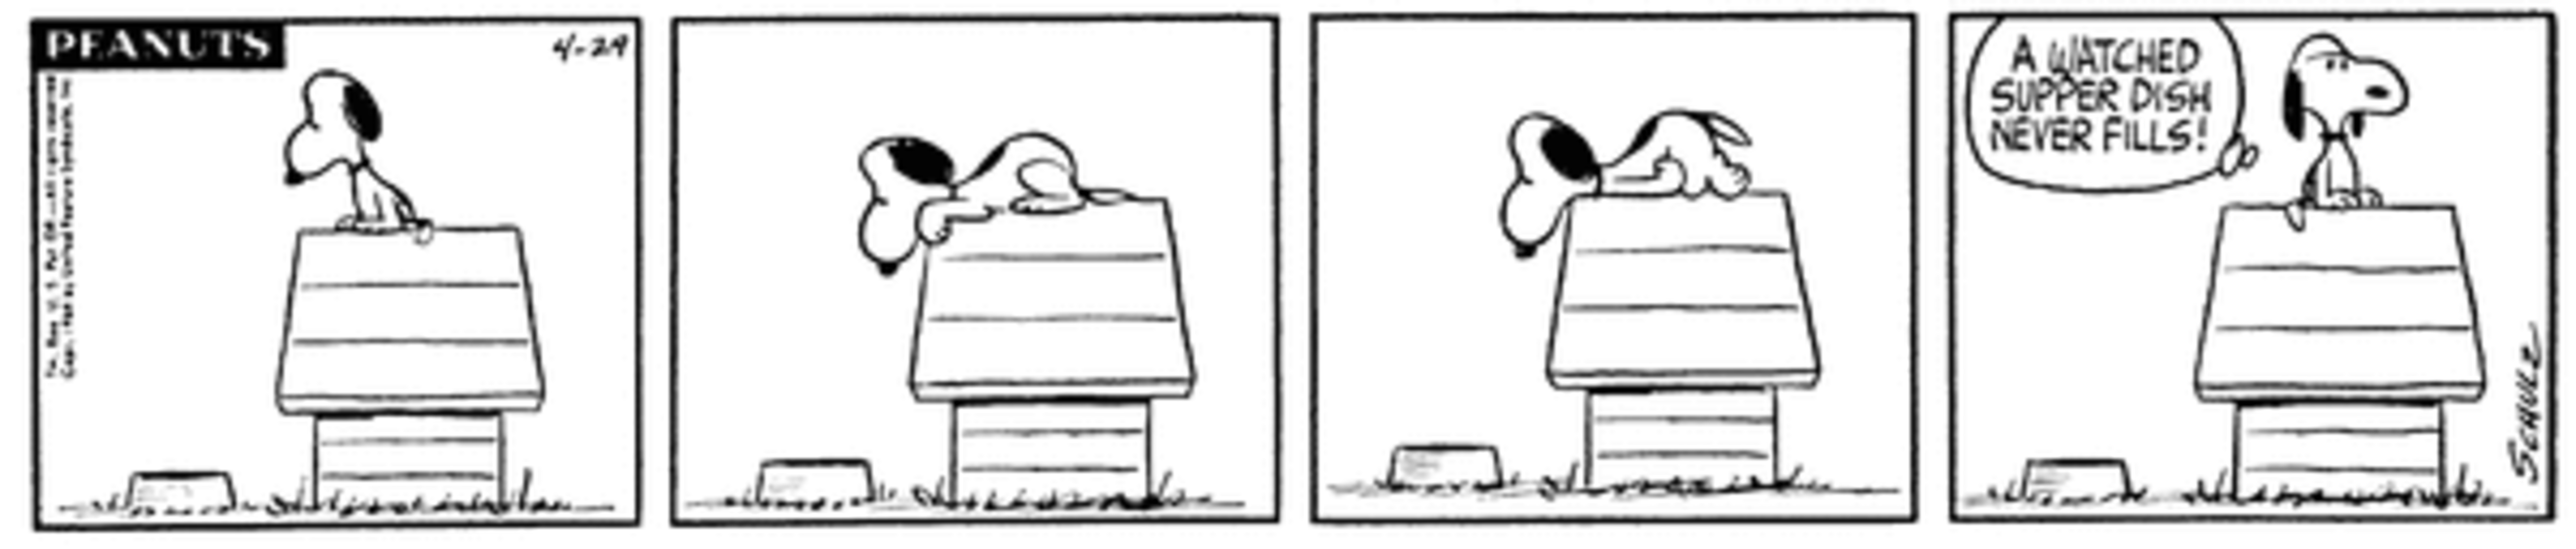 Snoopy on his doghouse in Peanuts.